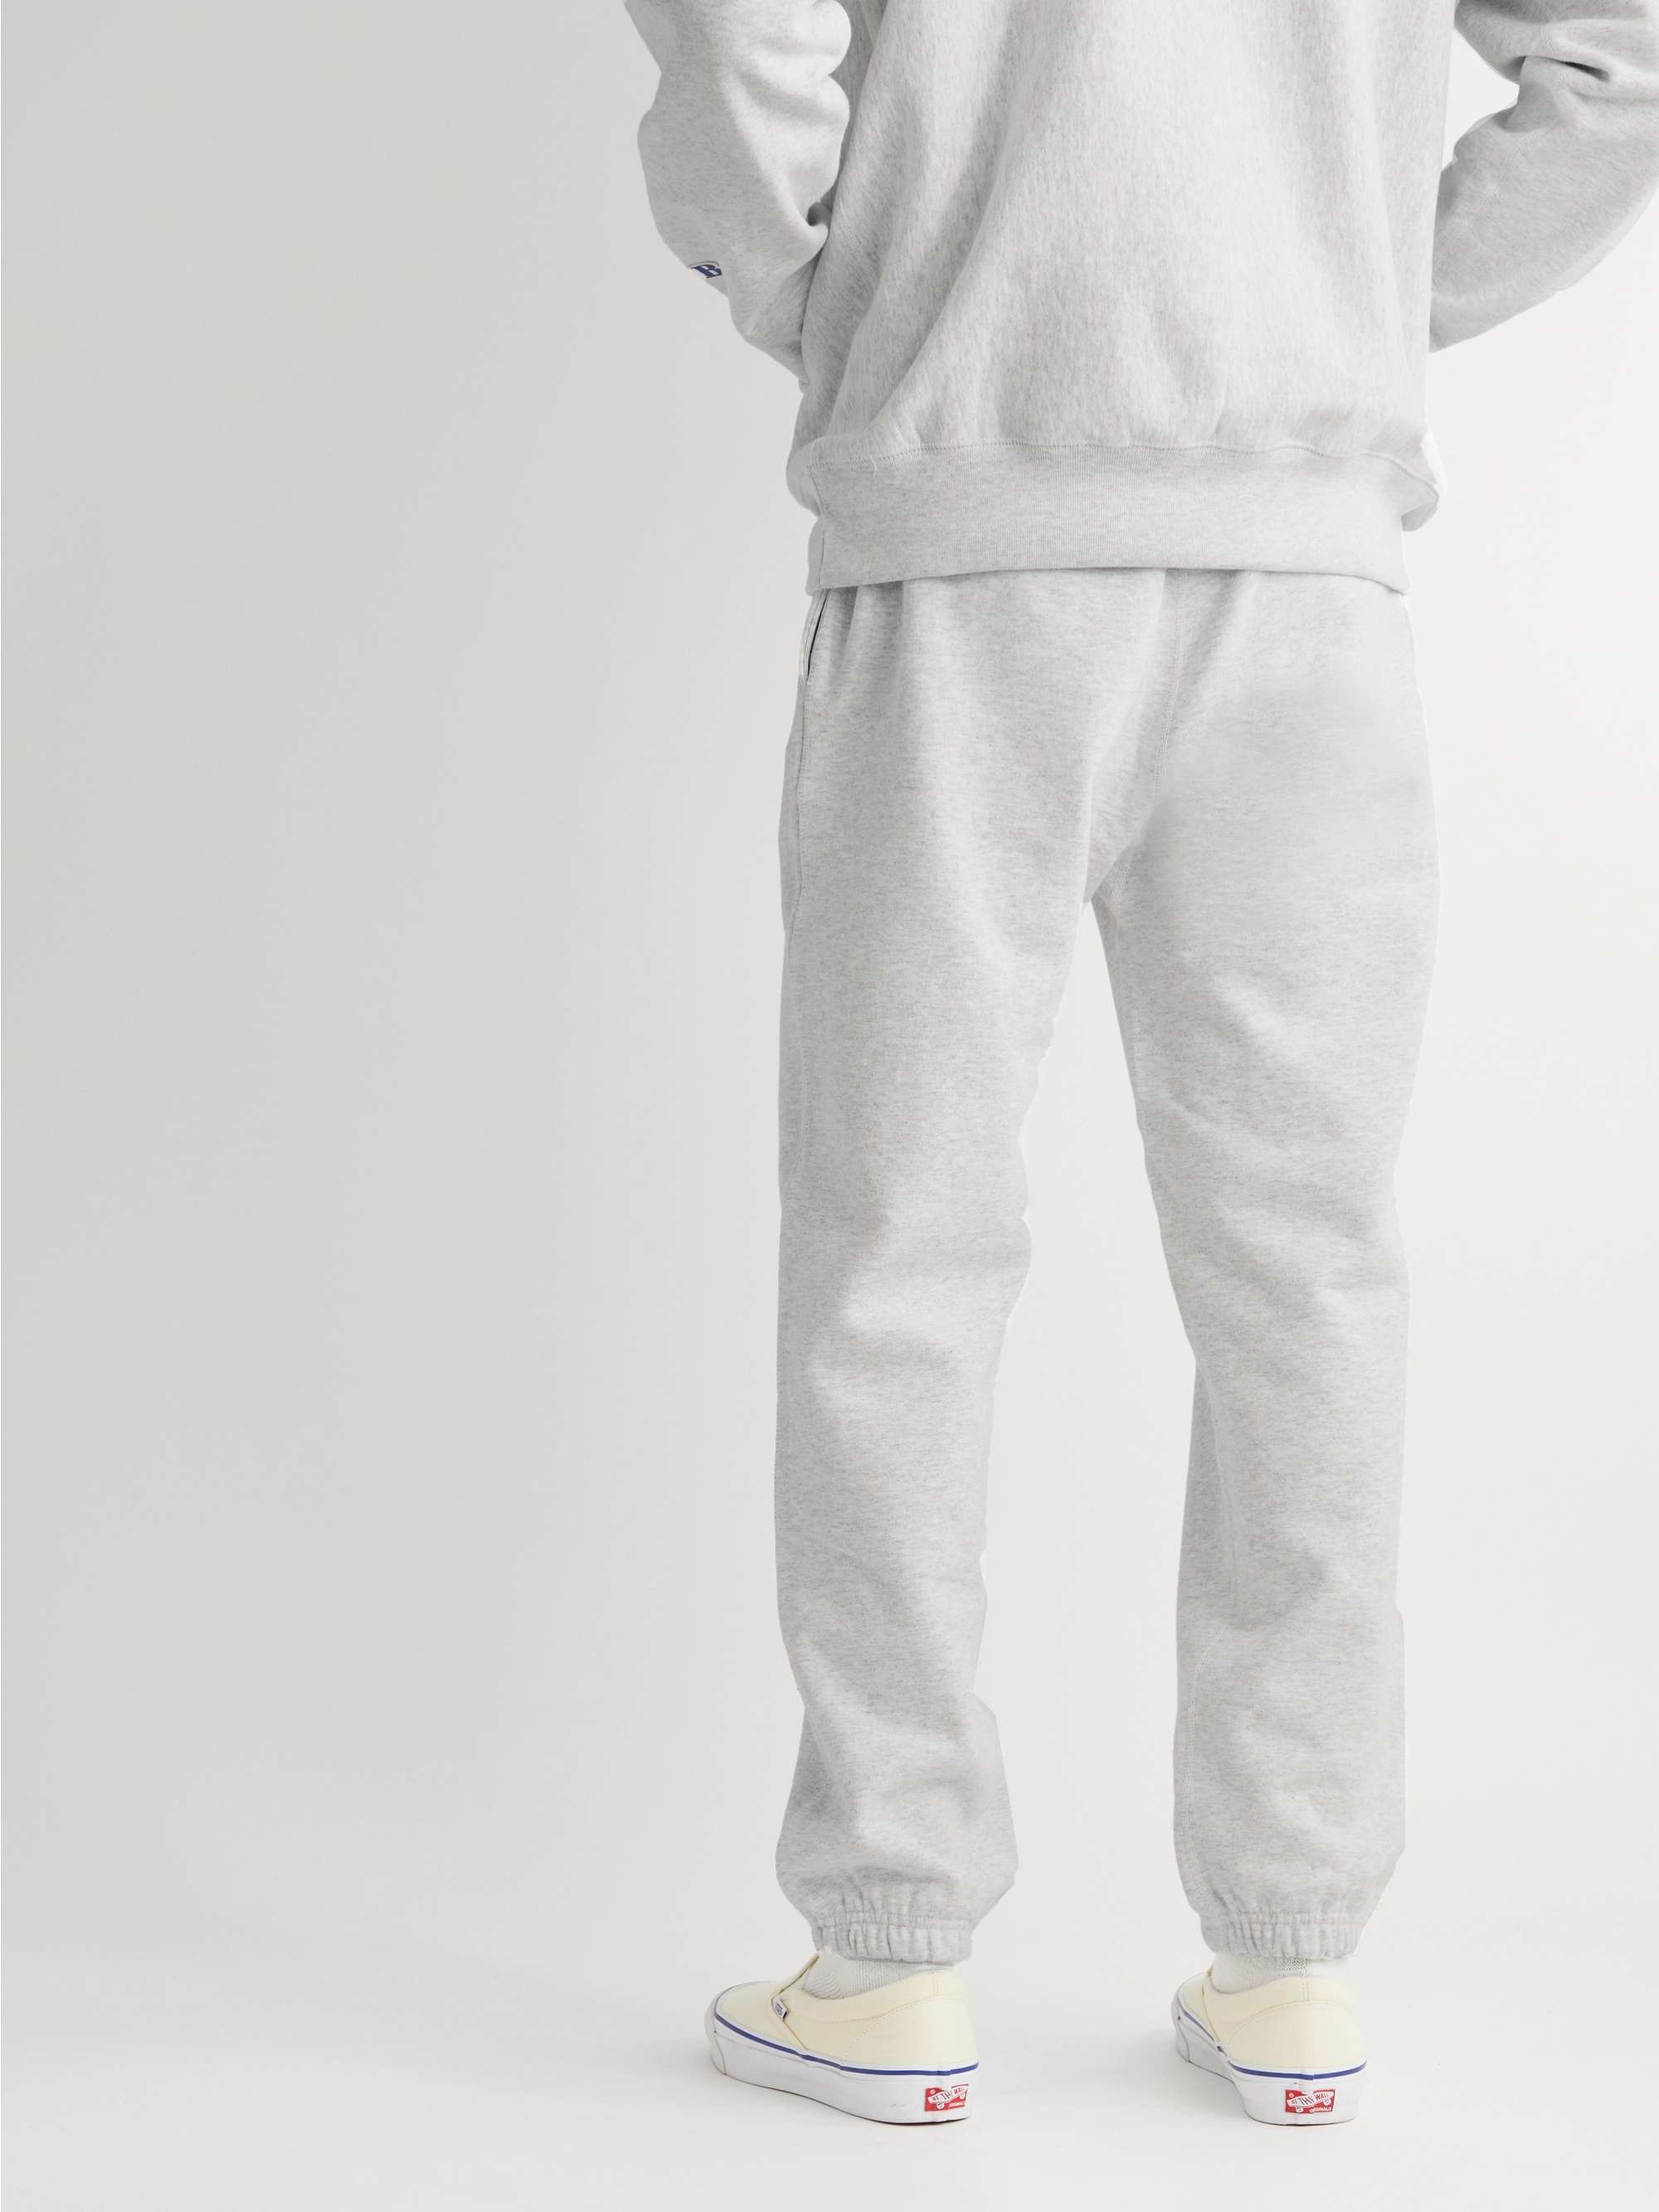 BETTER GIFT SHOP Tapered Logo-Print Cotton-Jersey Sweatpants